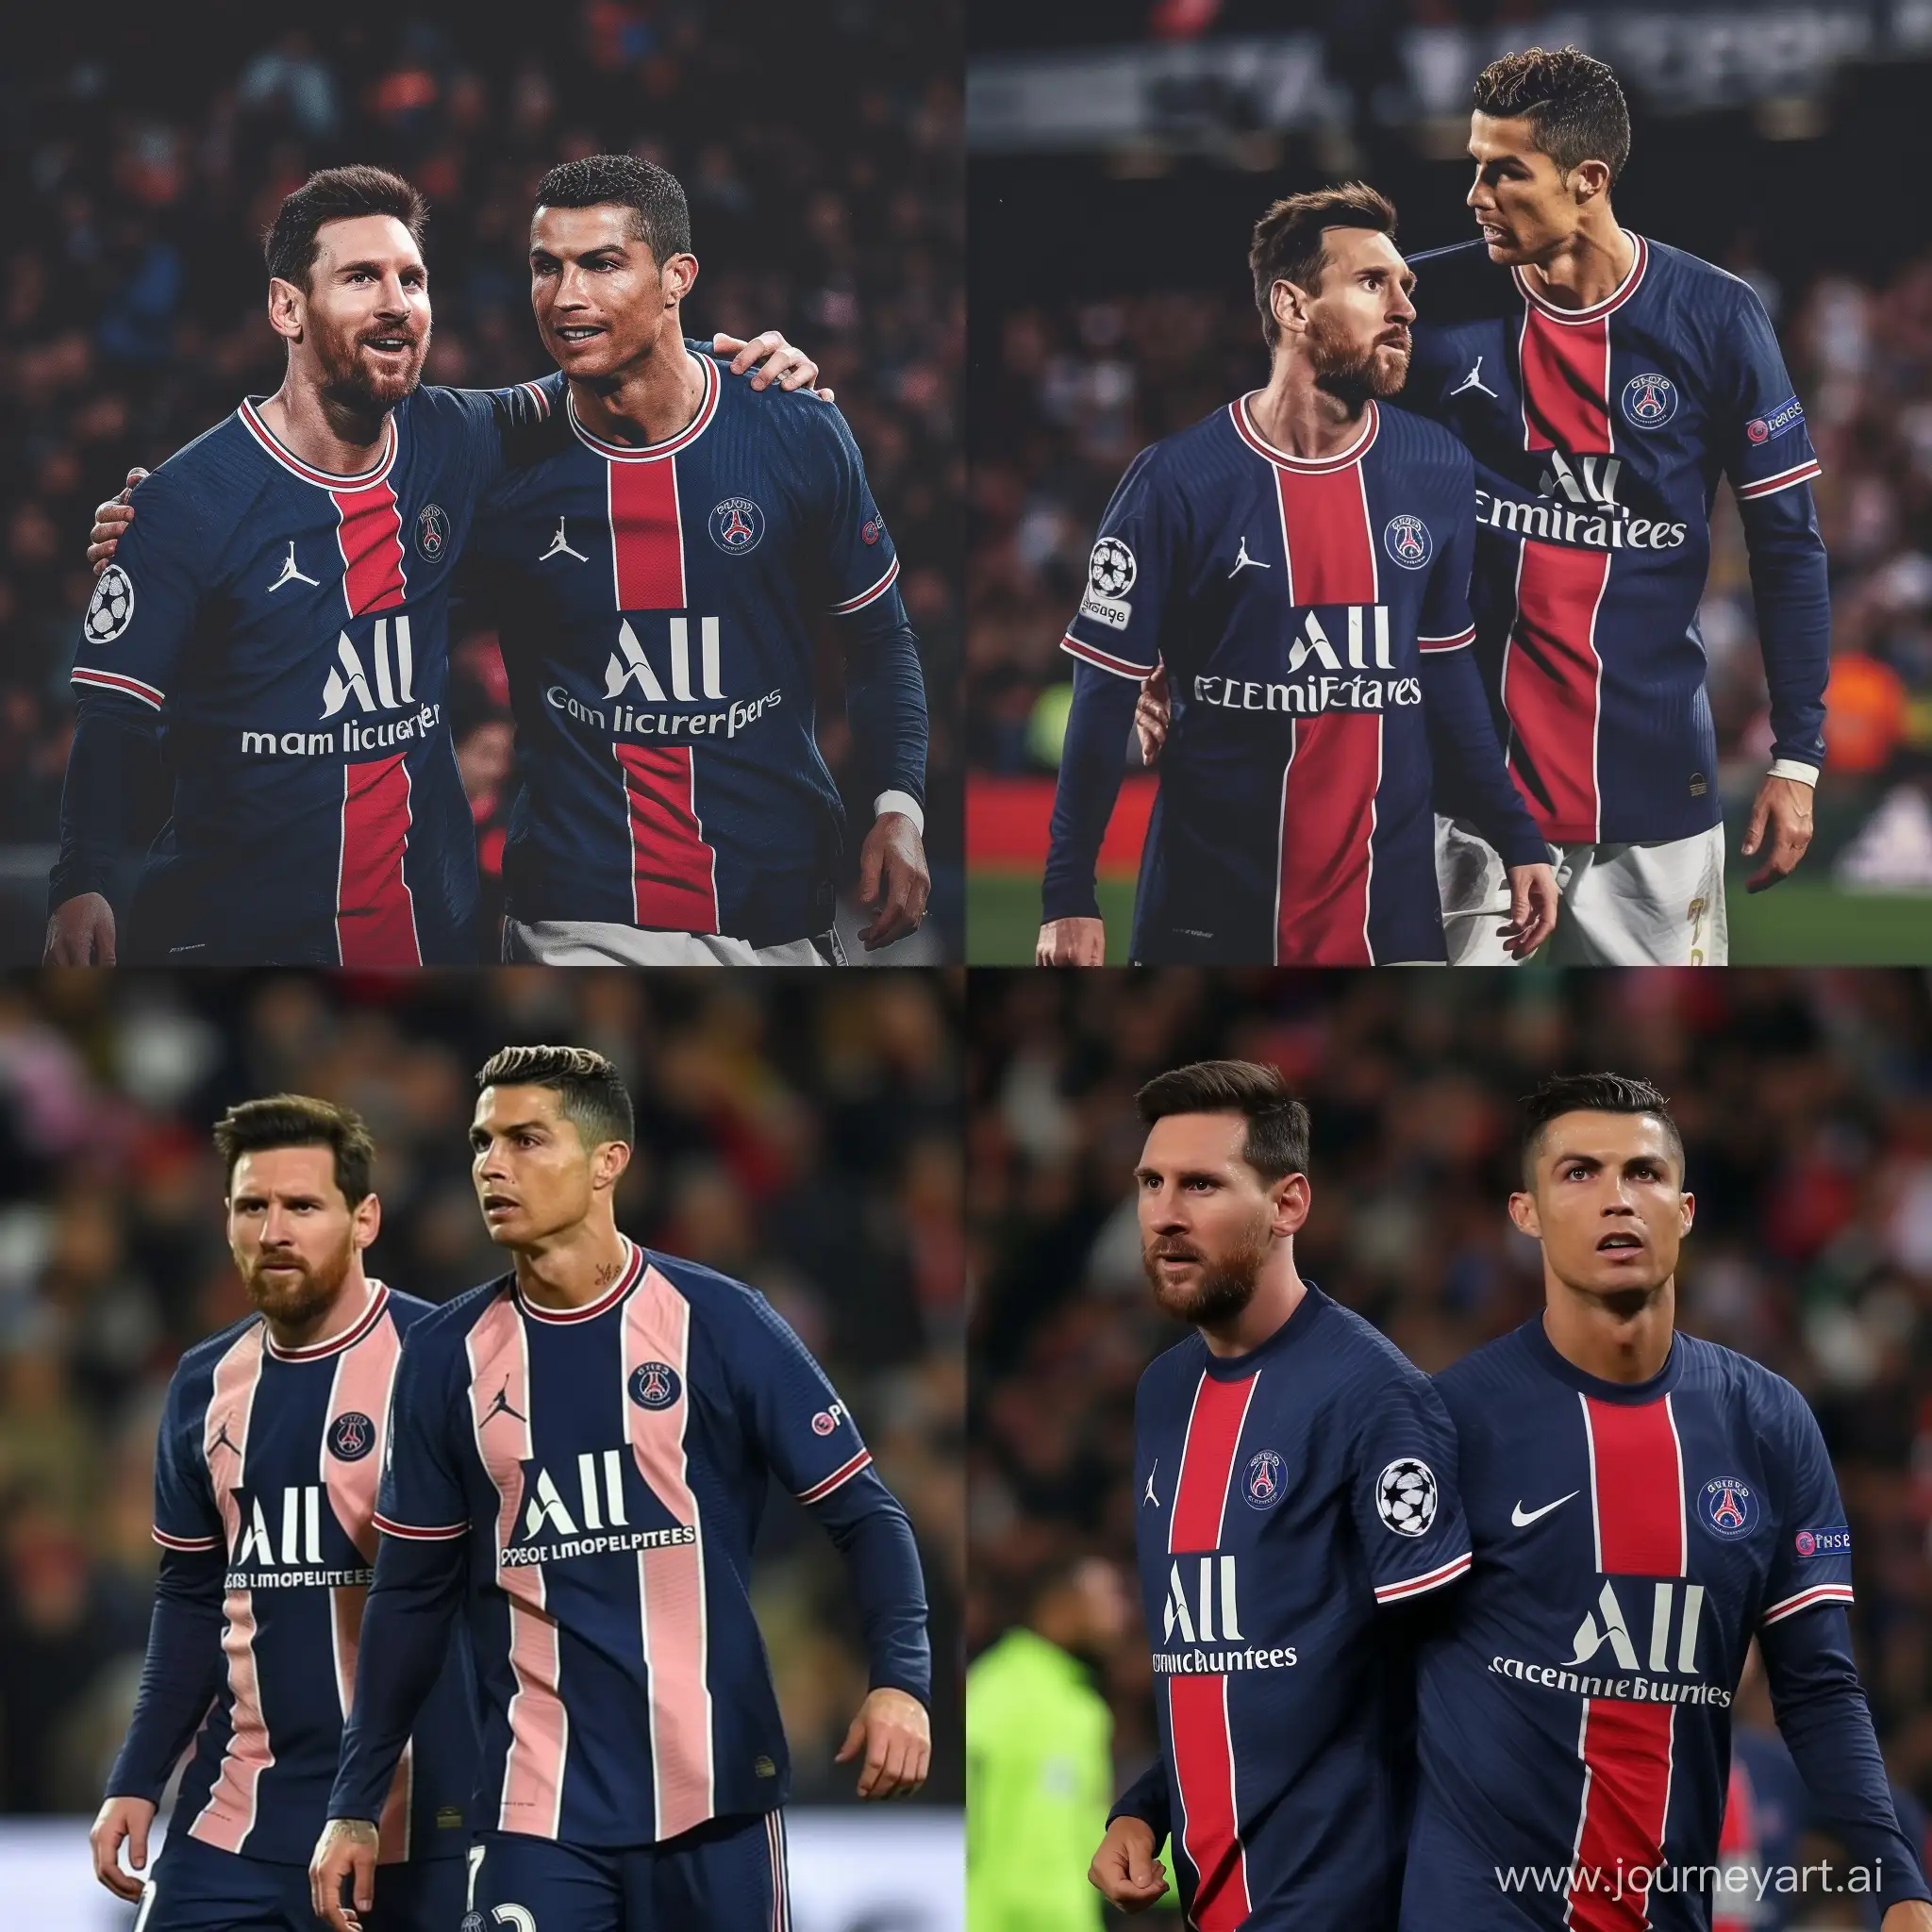 messi and ronaldo in psg jersey
